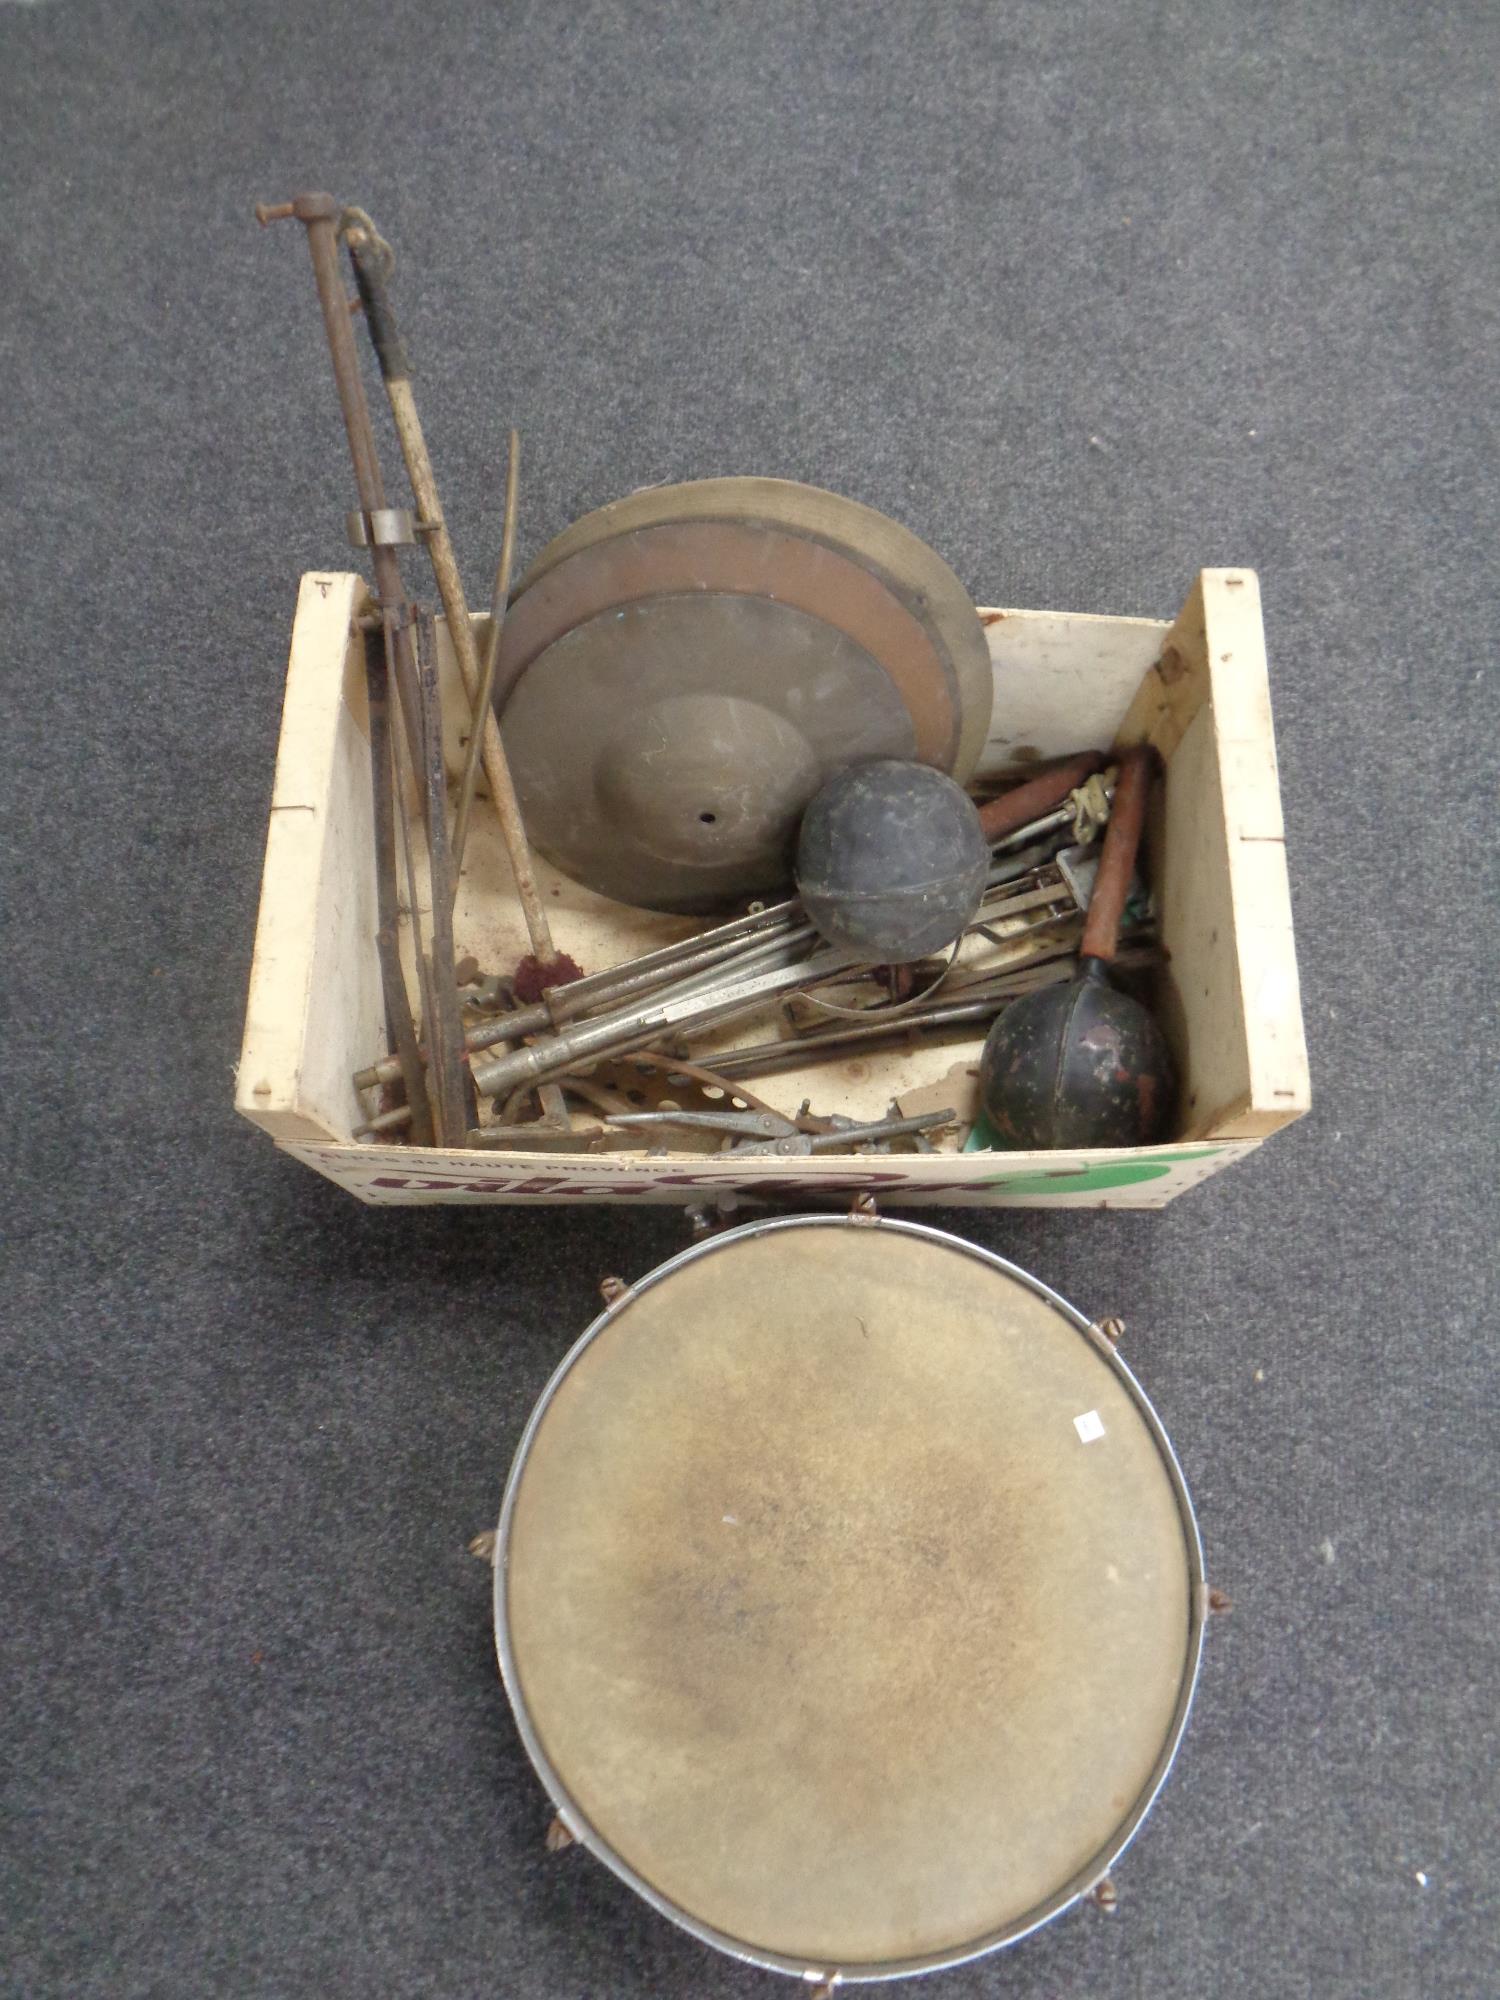 A box containing vintage snare drum with cymbals and stands together with a pair of maracas